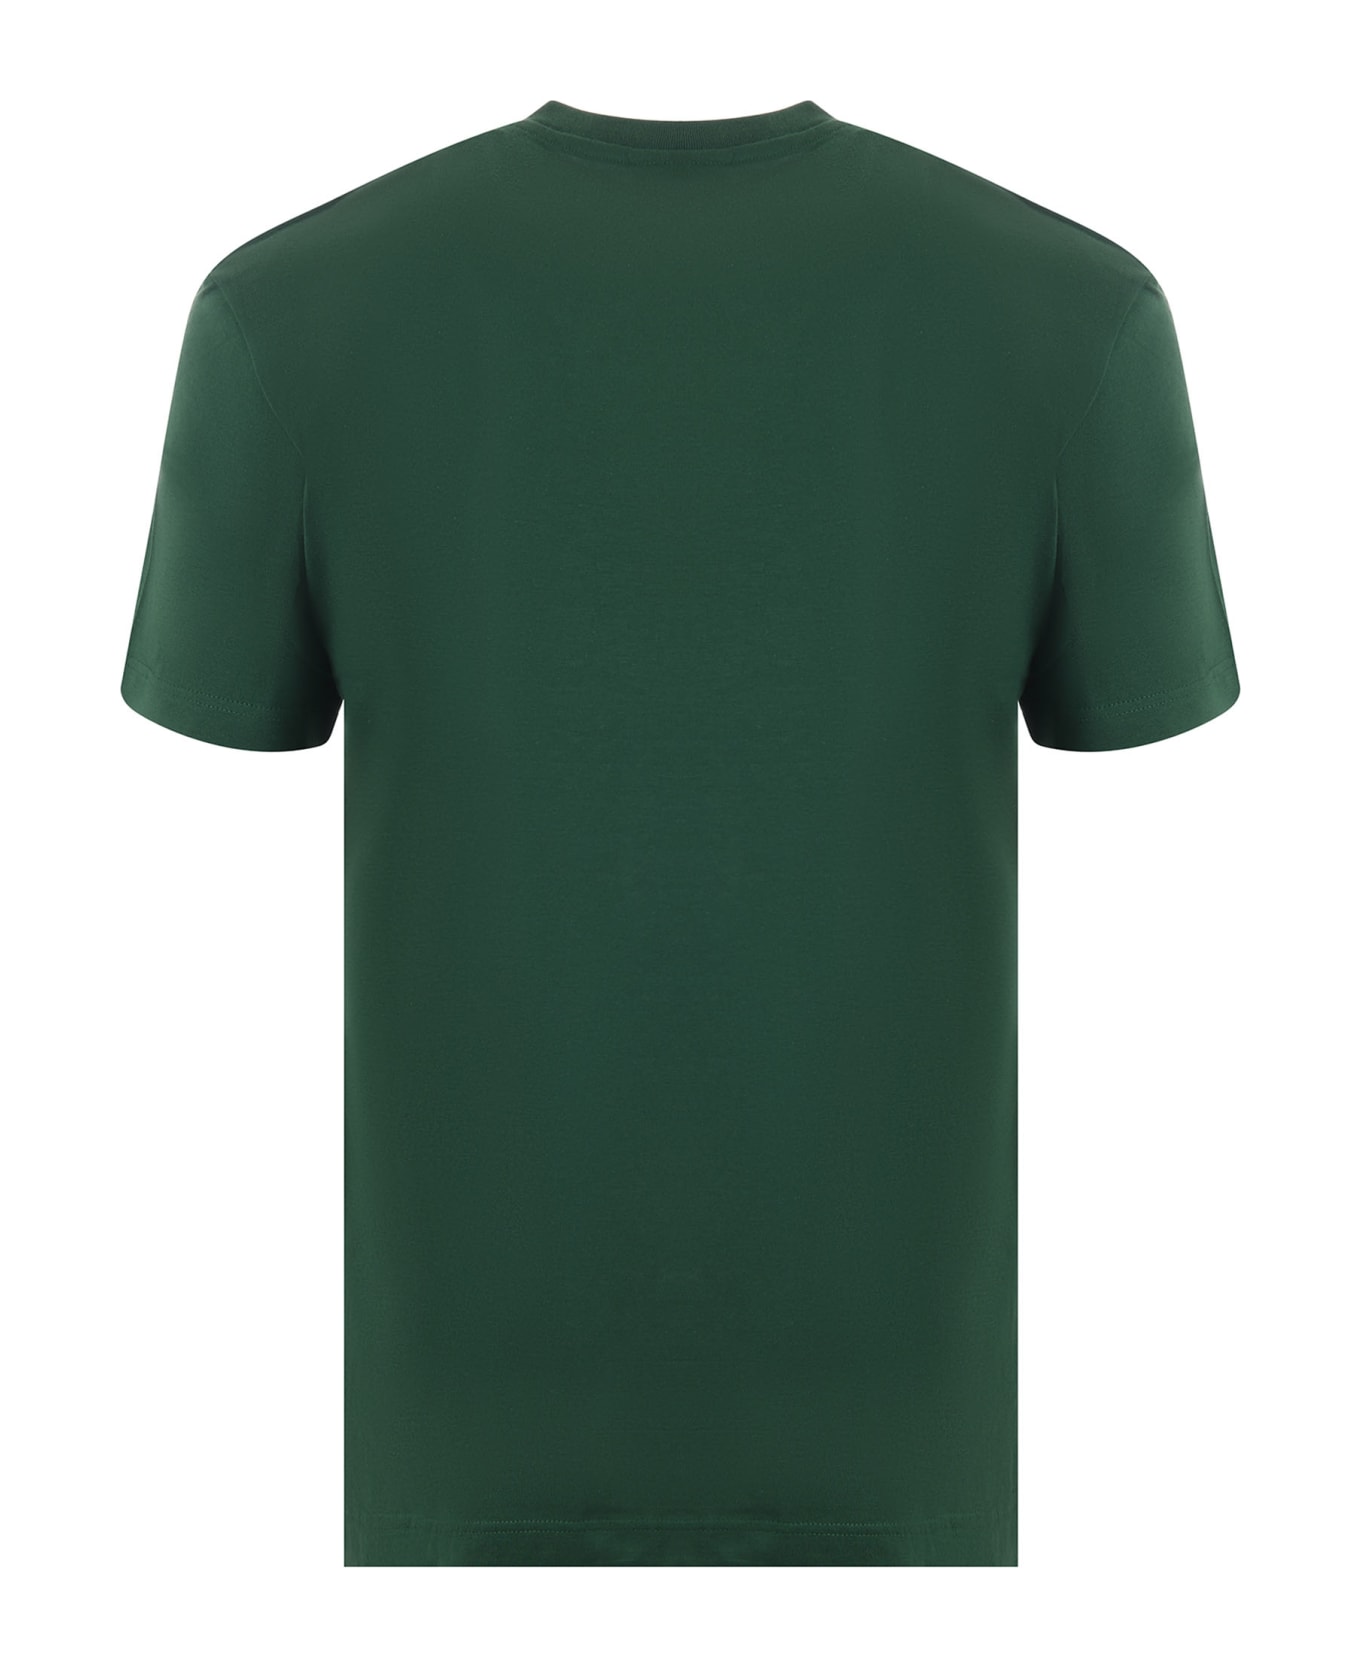 Lacoste Cotton T-shirt - Verde inglese